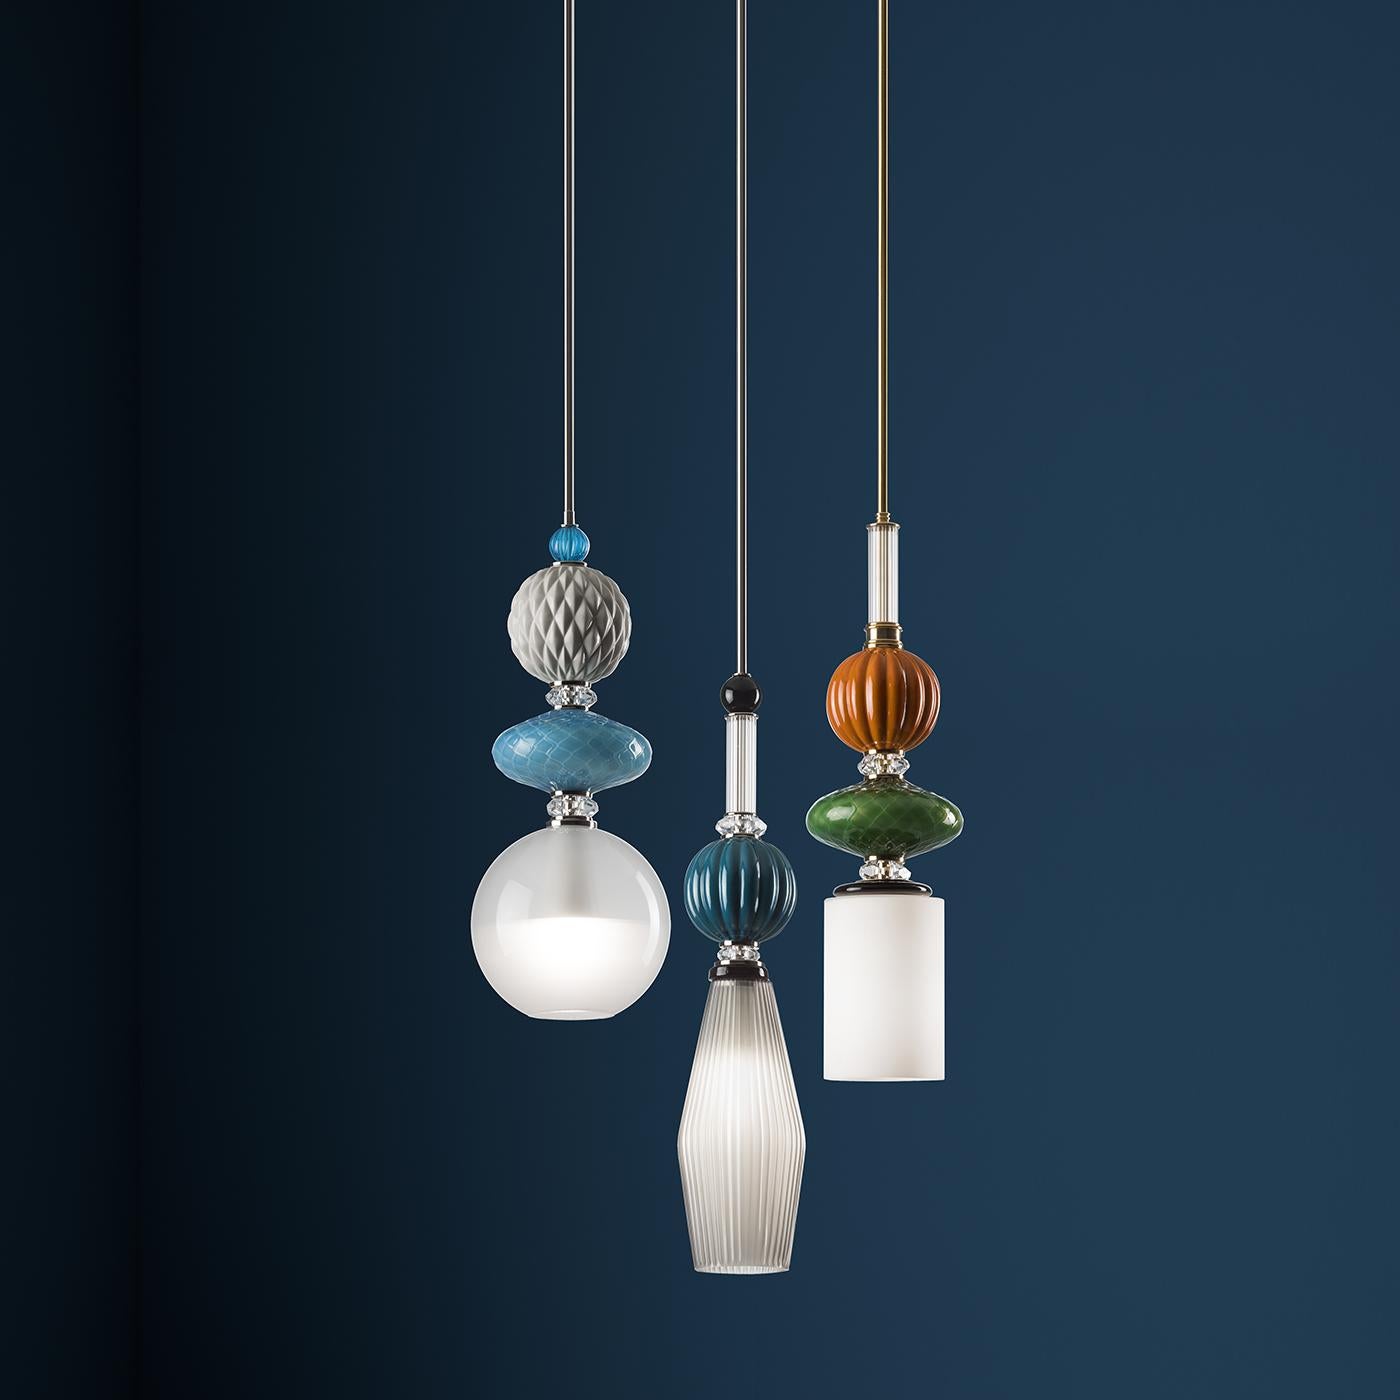 This exquisite pendant lamp showcases a rich and precious silhouette. The metal frame comes straight down from the ceiling from a cylindrical element to end in an eye-catching composition. The grooved glass diffuser slightly tapers downwards and